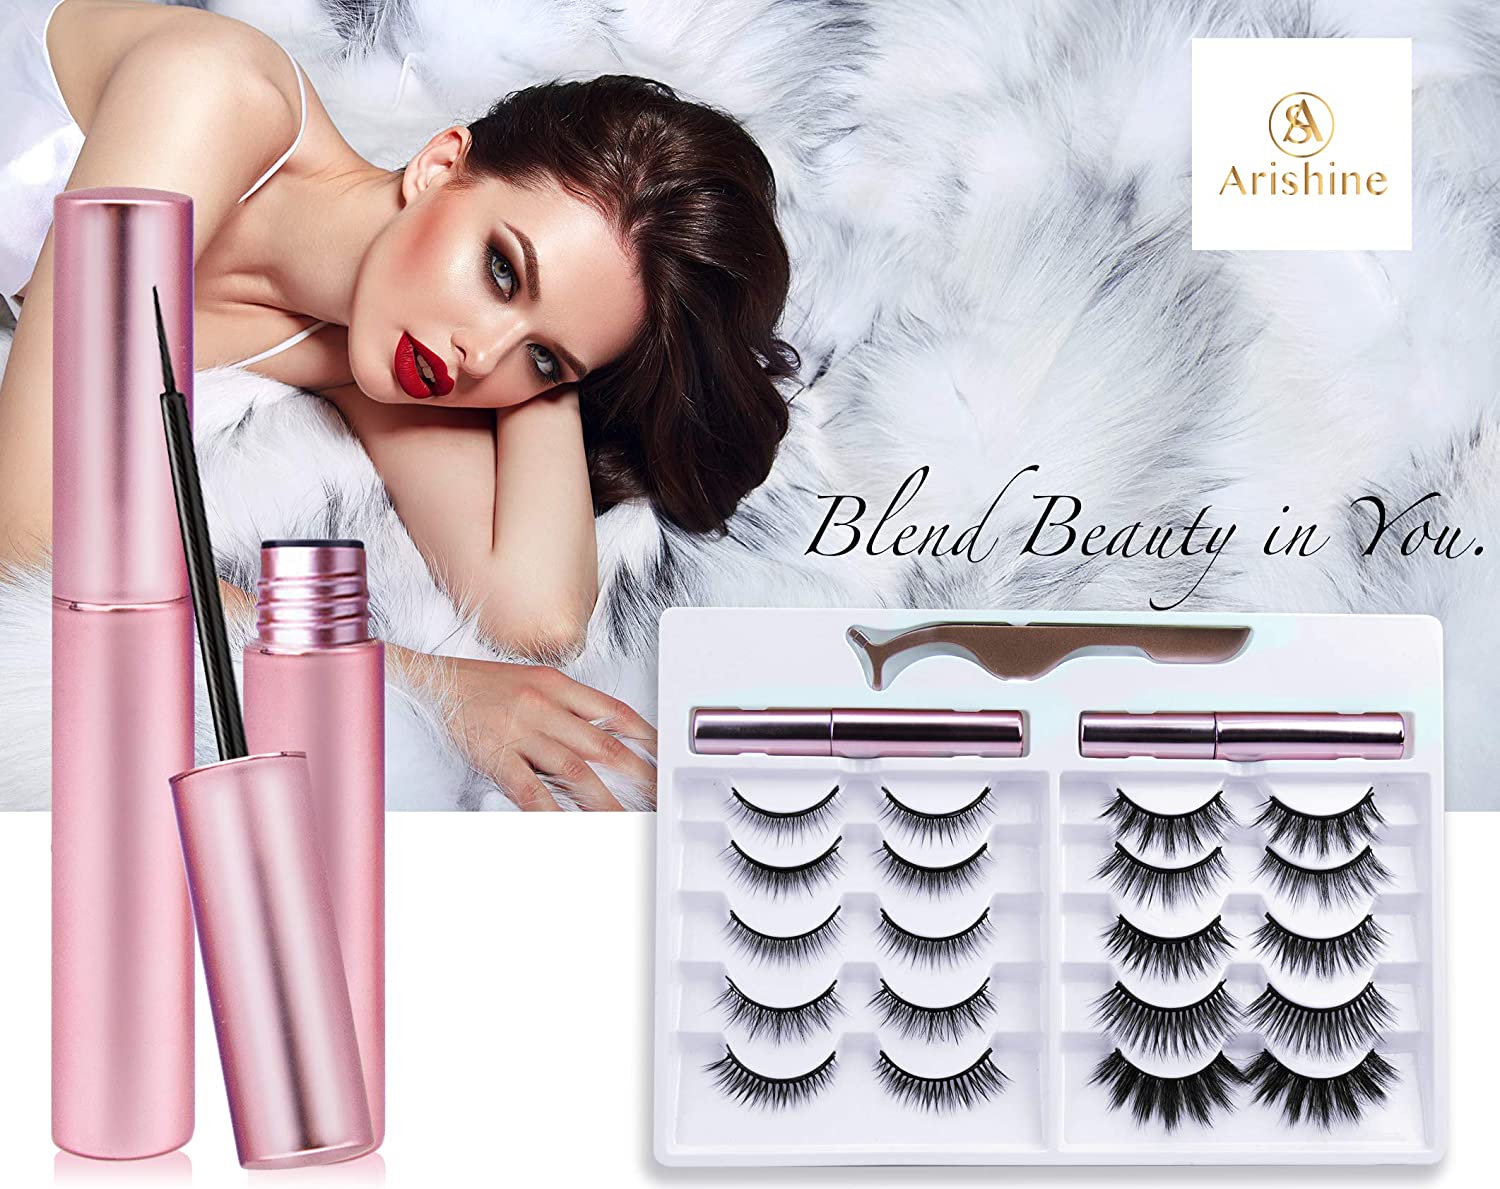 New Arishine 10 Different Pairs of Magnetic Eyelashes Kit with 2 Magnetic Eyeliners & Tweezers, Natural Look & No Glue Reusable False Lashes